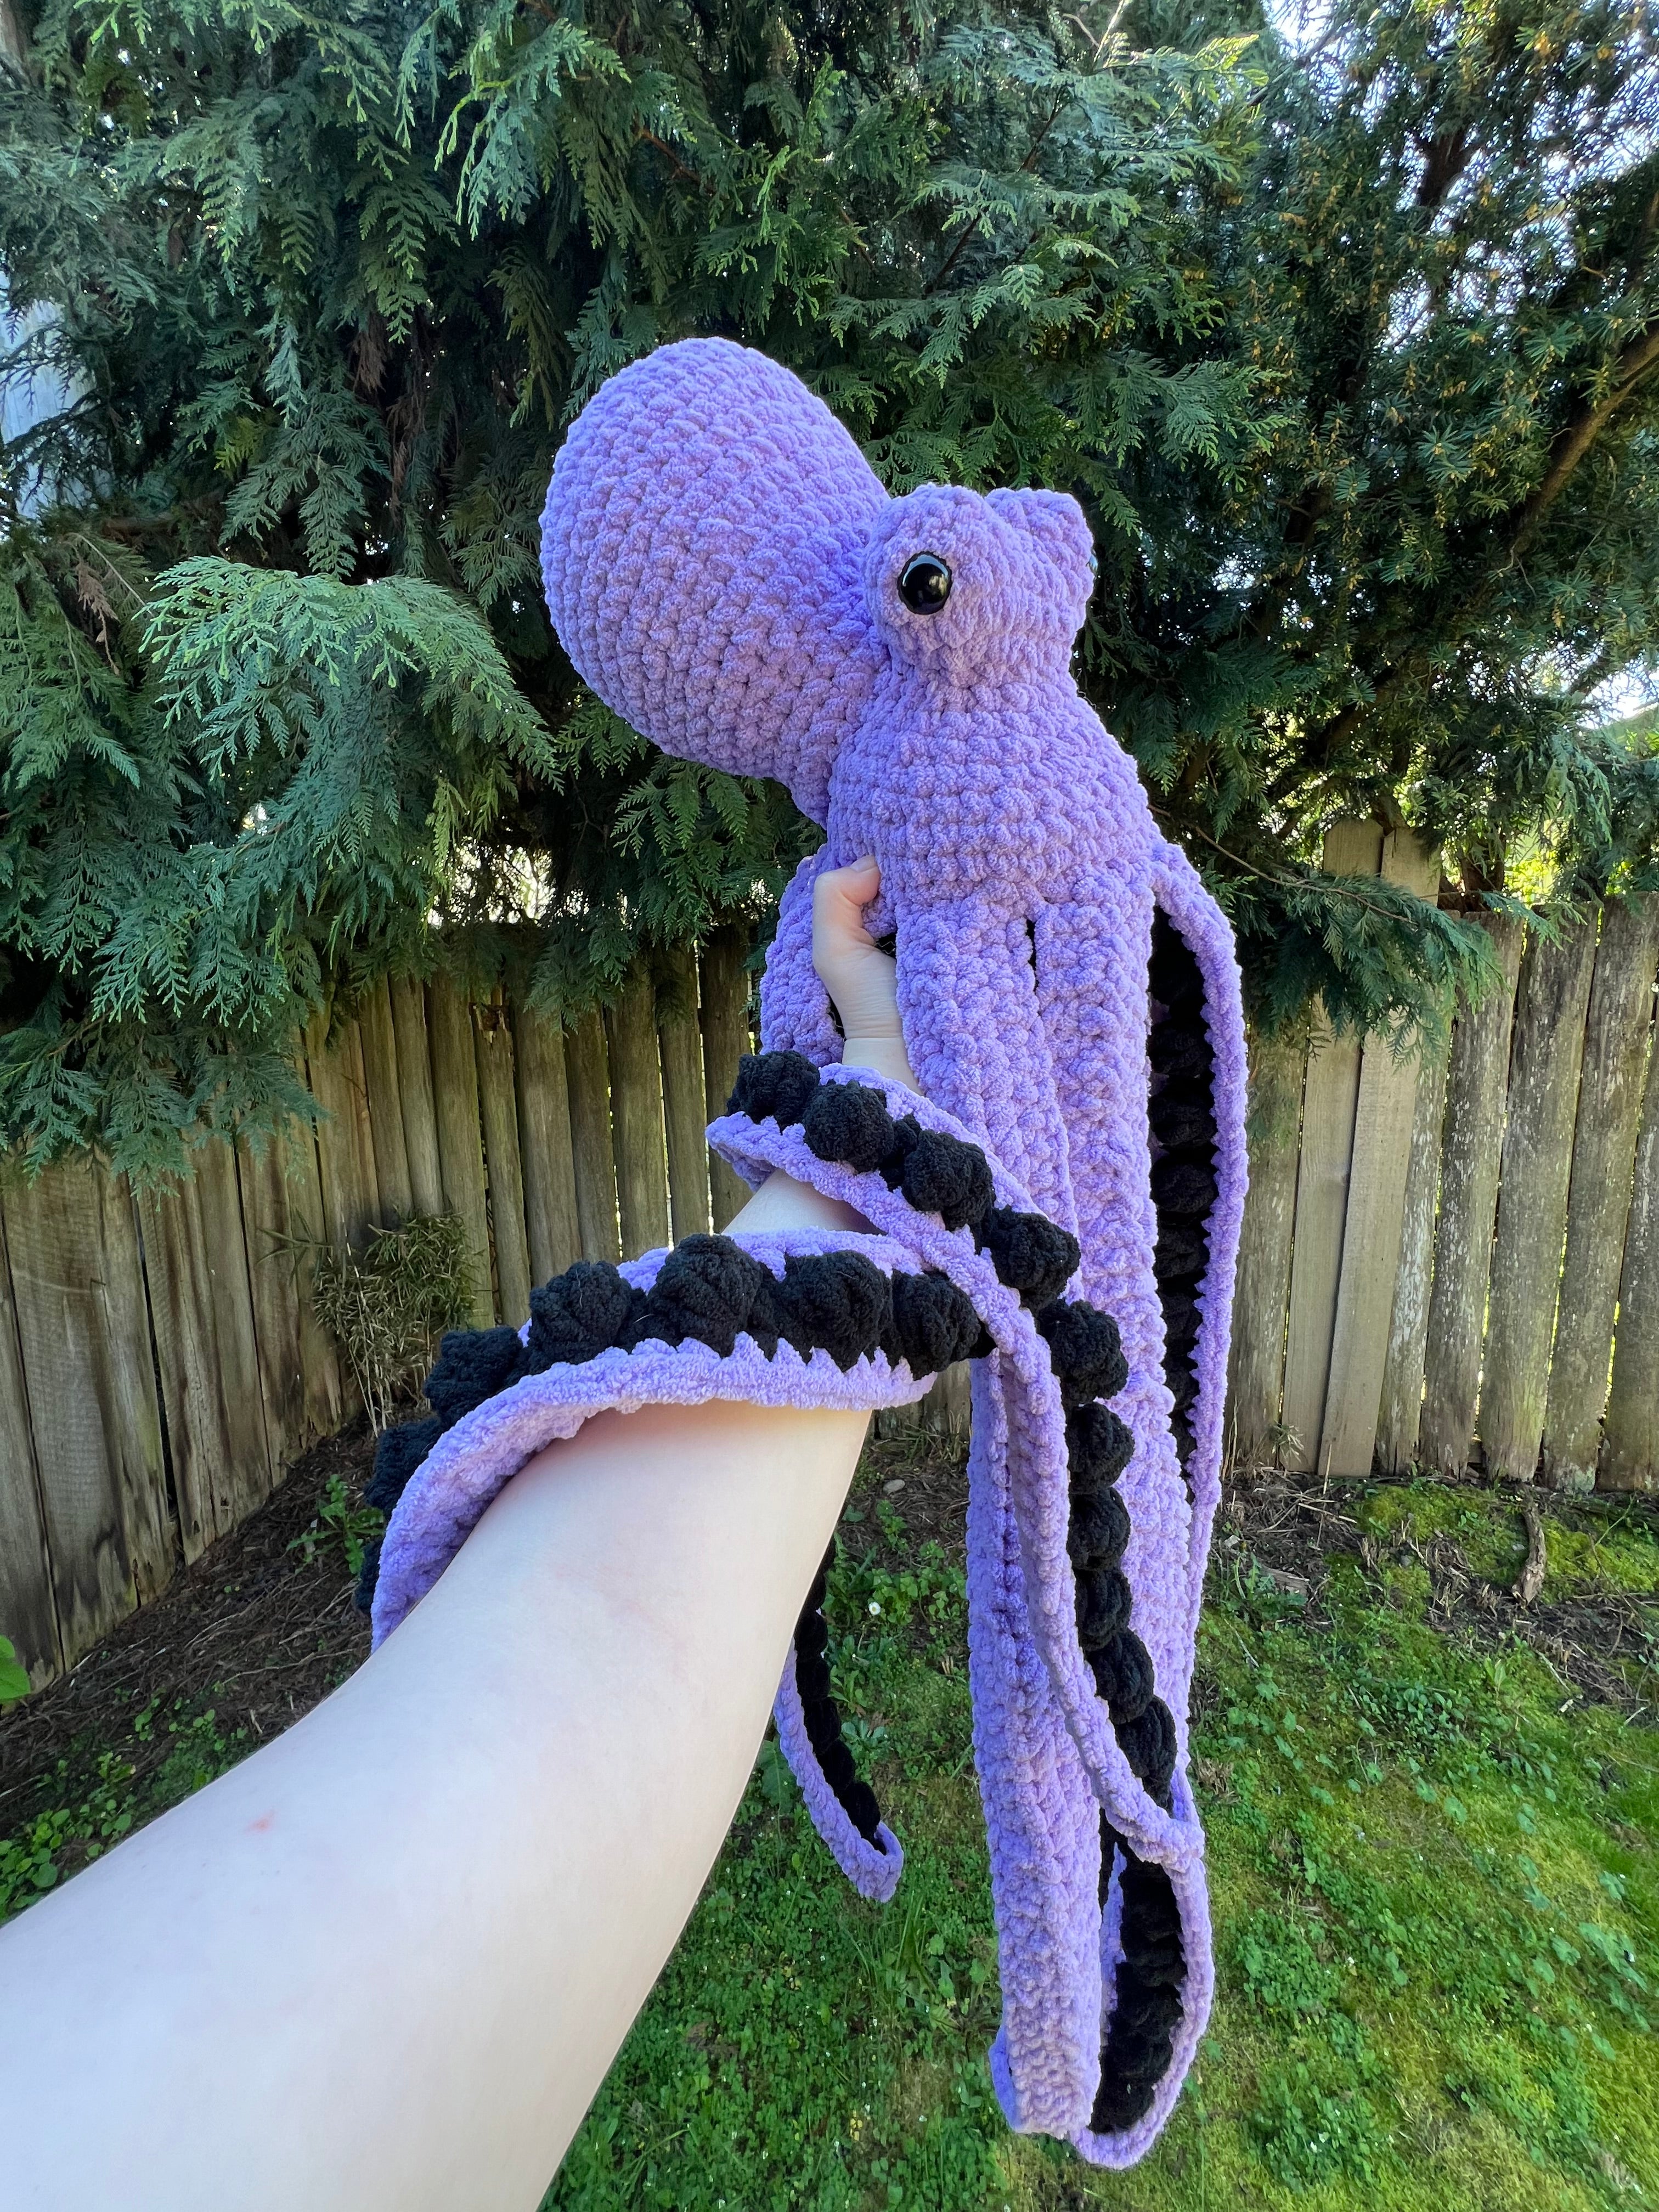 Ollie the Octopus made to order octopus plushie